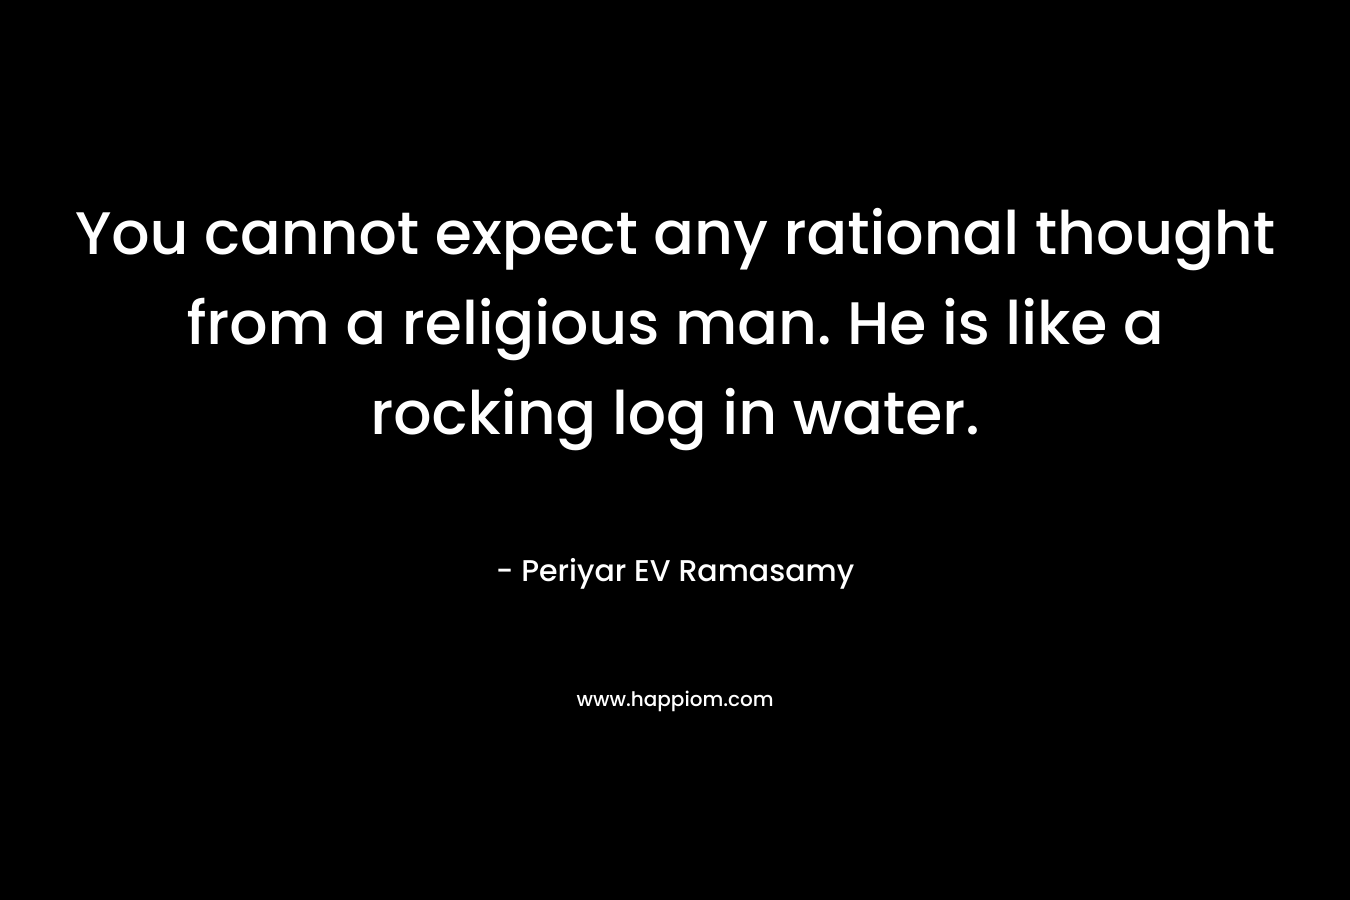 You cannot expect any rational thought from a religious man. He is like a rocking log in water.